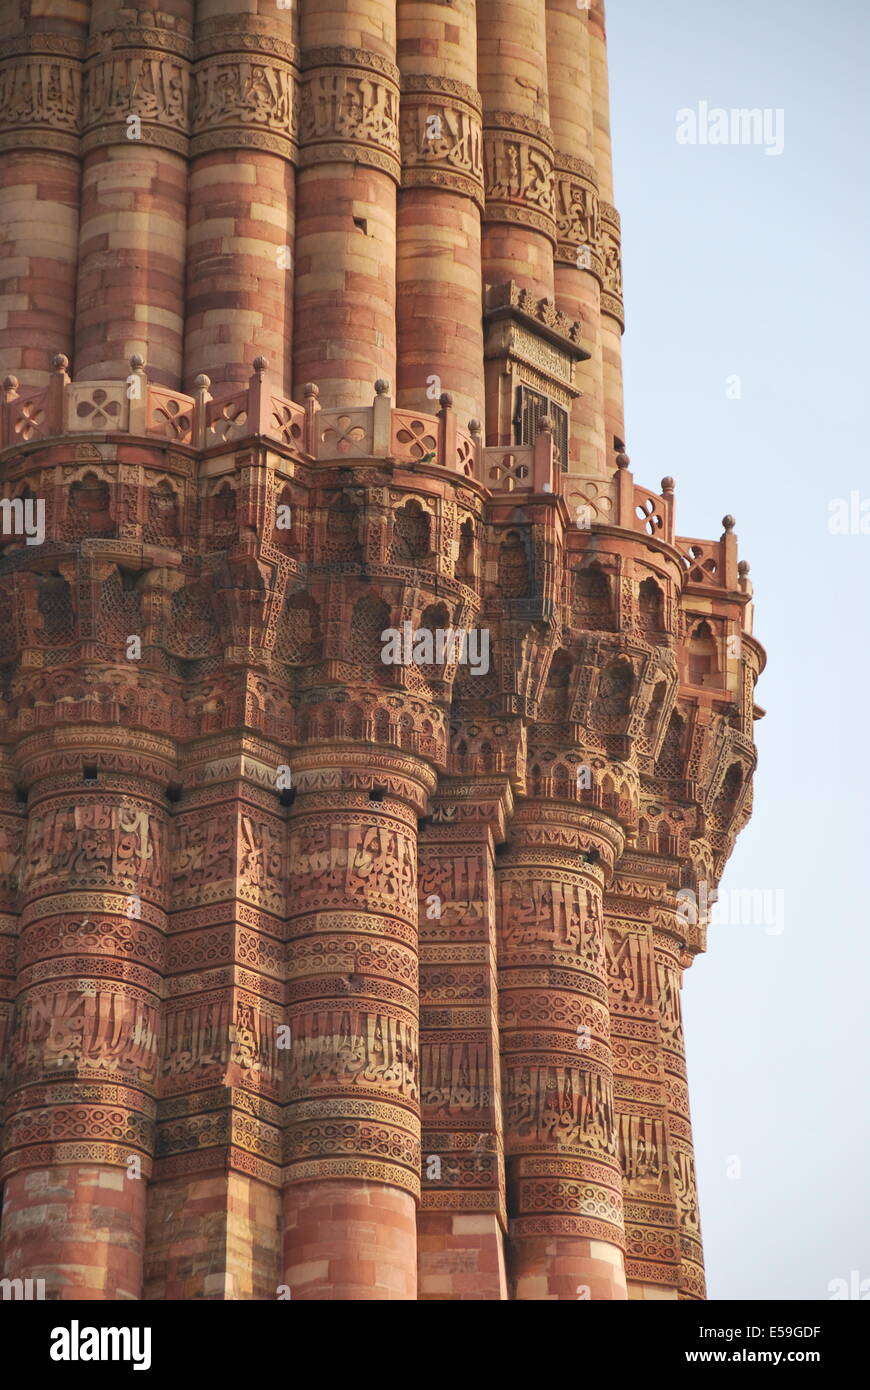 India. Delhi. Qutb Minar  is the tallest brick minaret in the world, and an important example of Indo-Islamic Architecture. Stock Photo